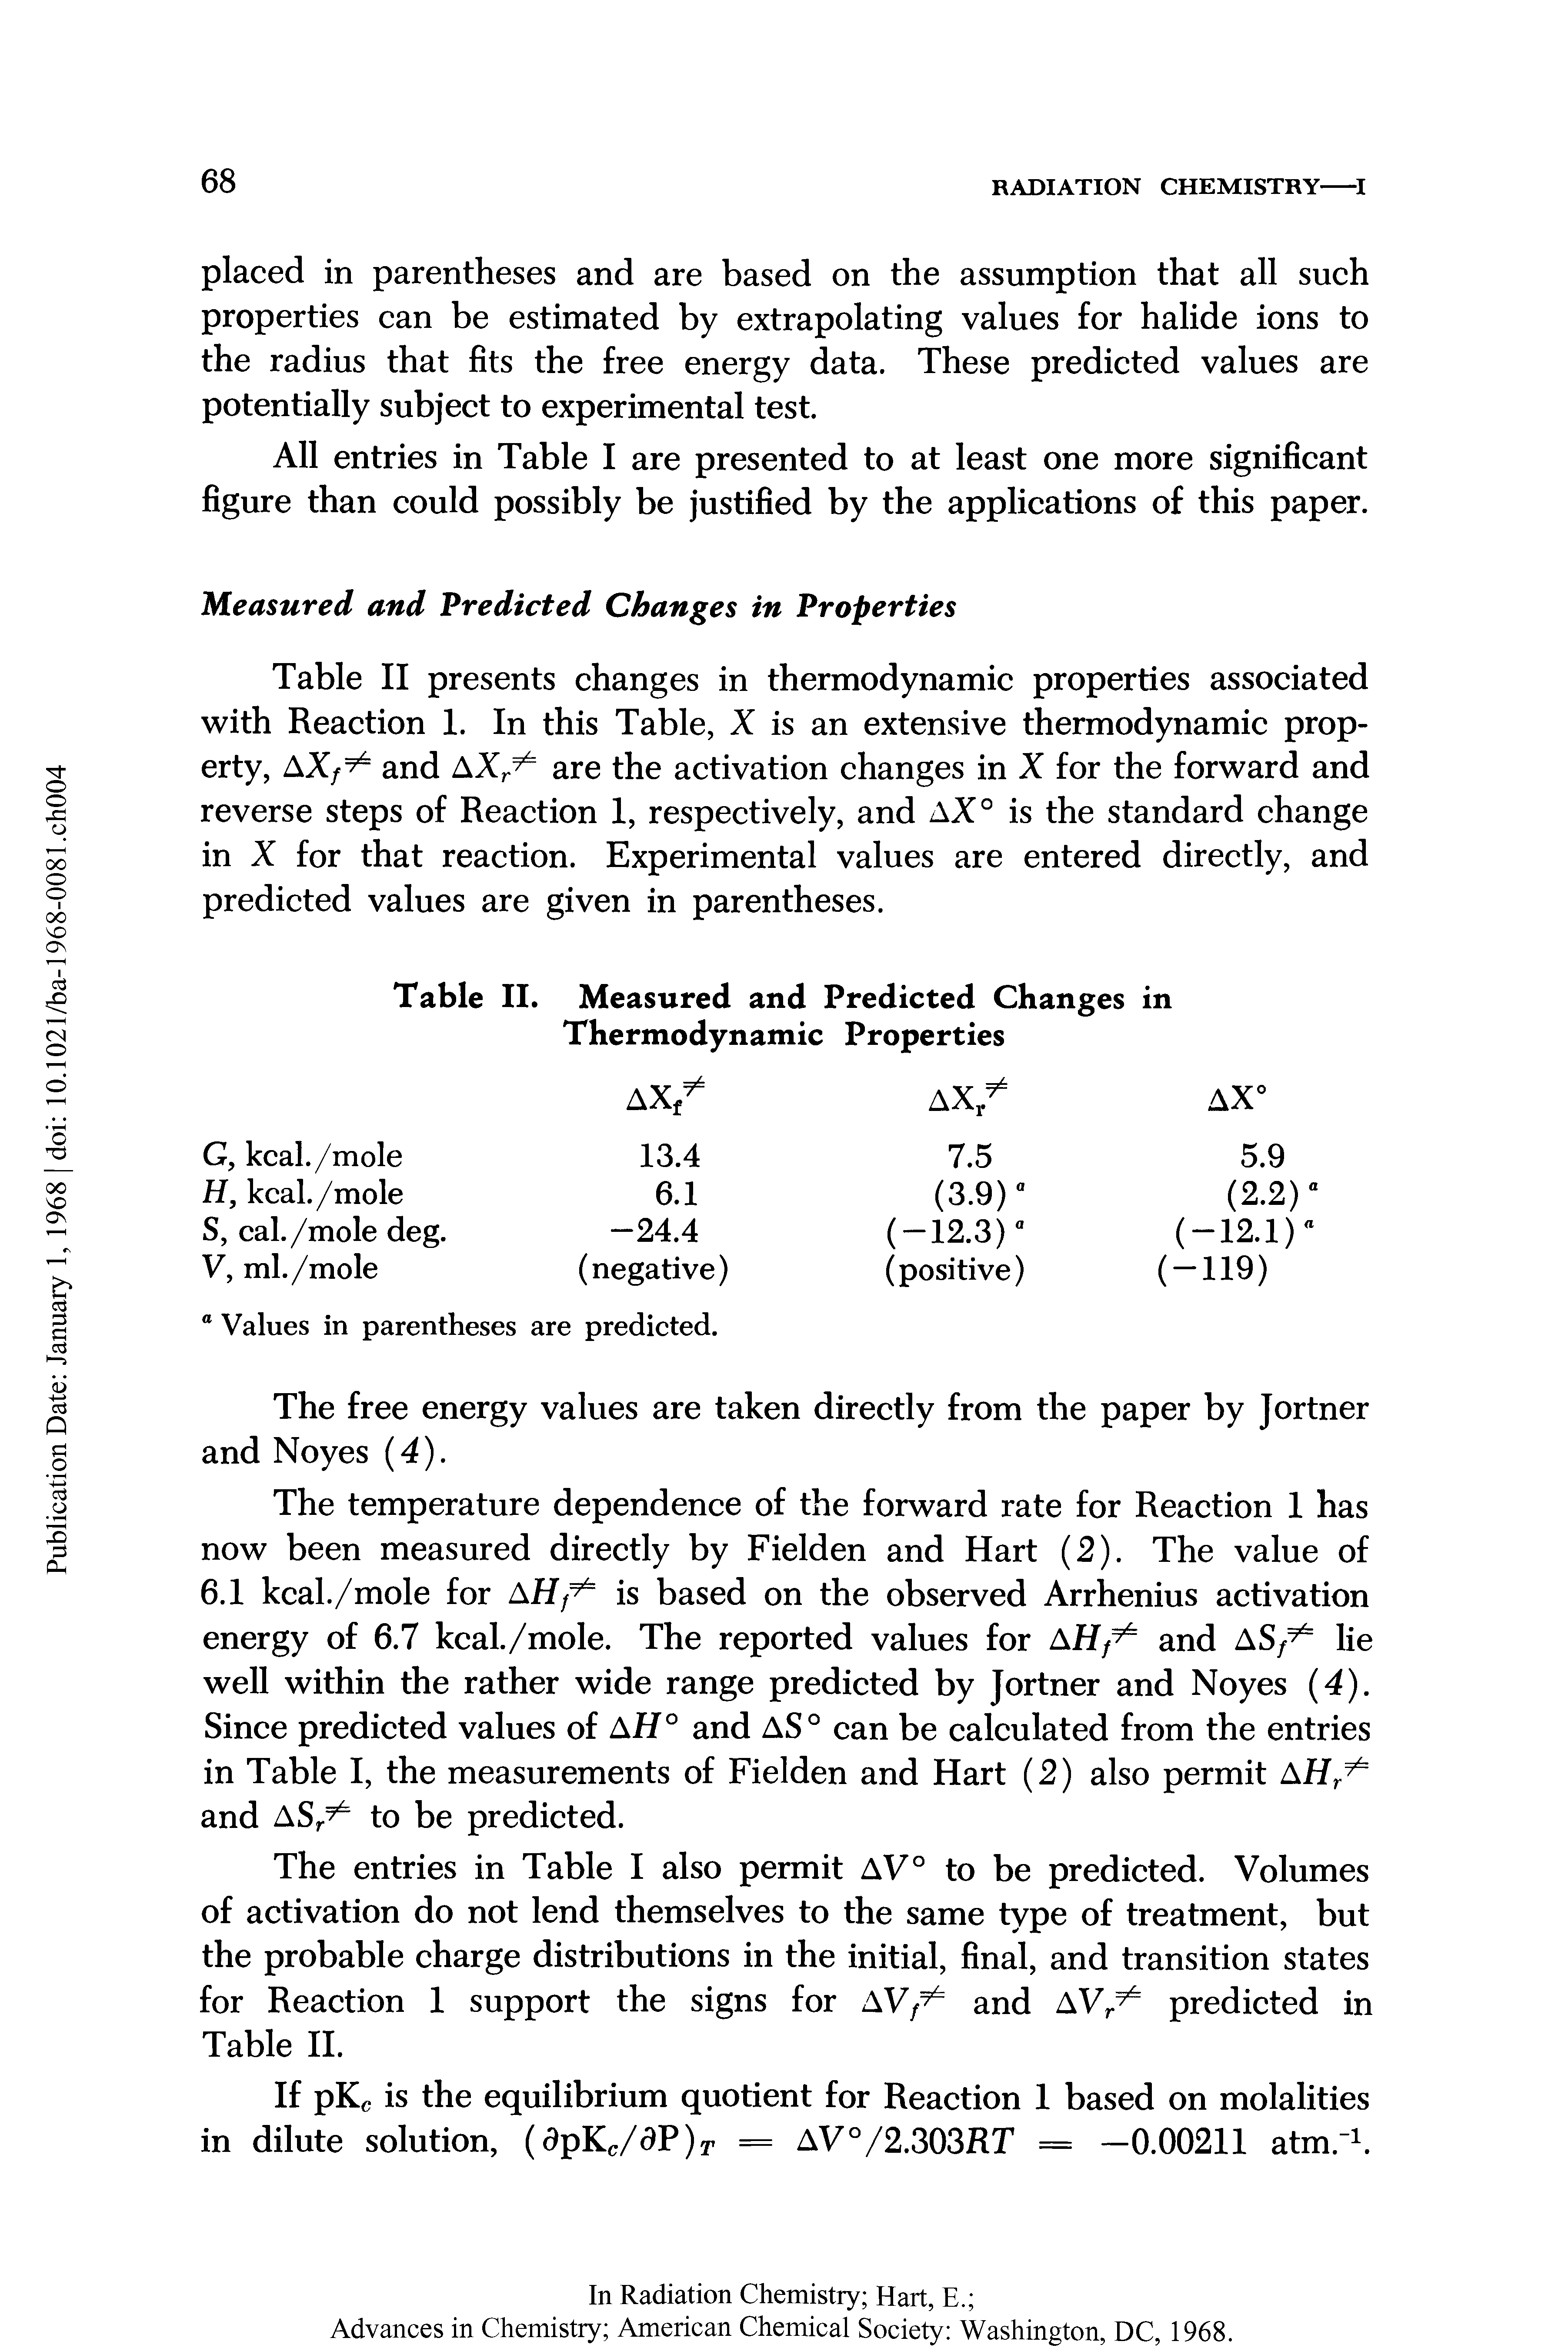 Table II presents changes in thermodynamic properties associated with Reaction 1. In this Table, X is an extensive thermodynamic property, AX/ and AXr are the activation changes in X for the forward and reverse steps of Reaction 1, respectively, and AX° is the standard change in X for that reaction. Experimental values are entered directly, and predicted values are given in parentheses.